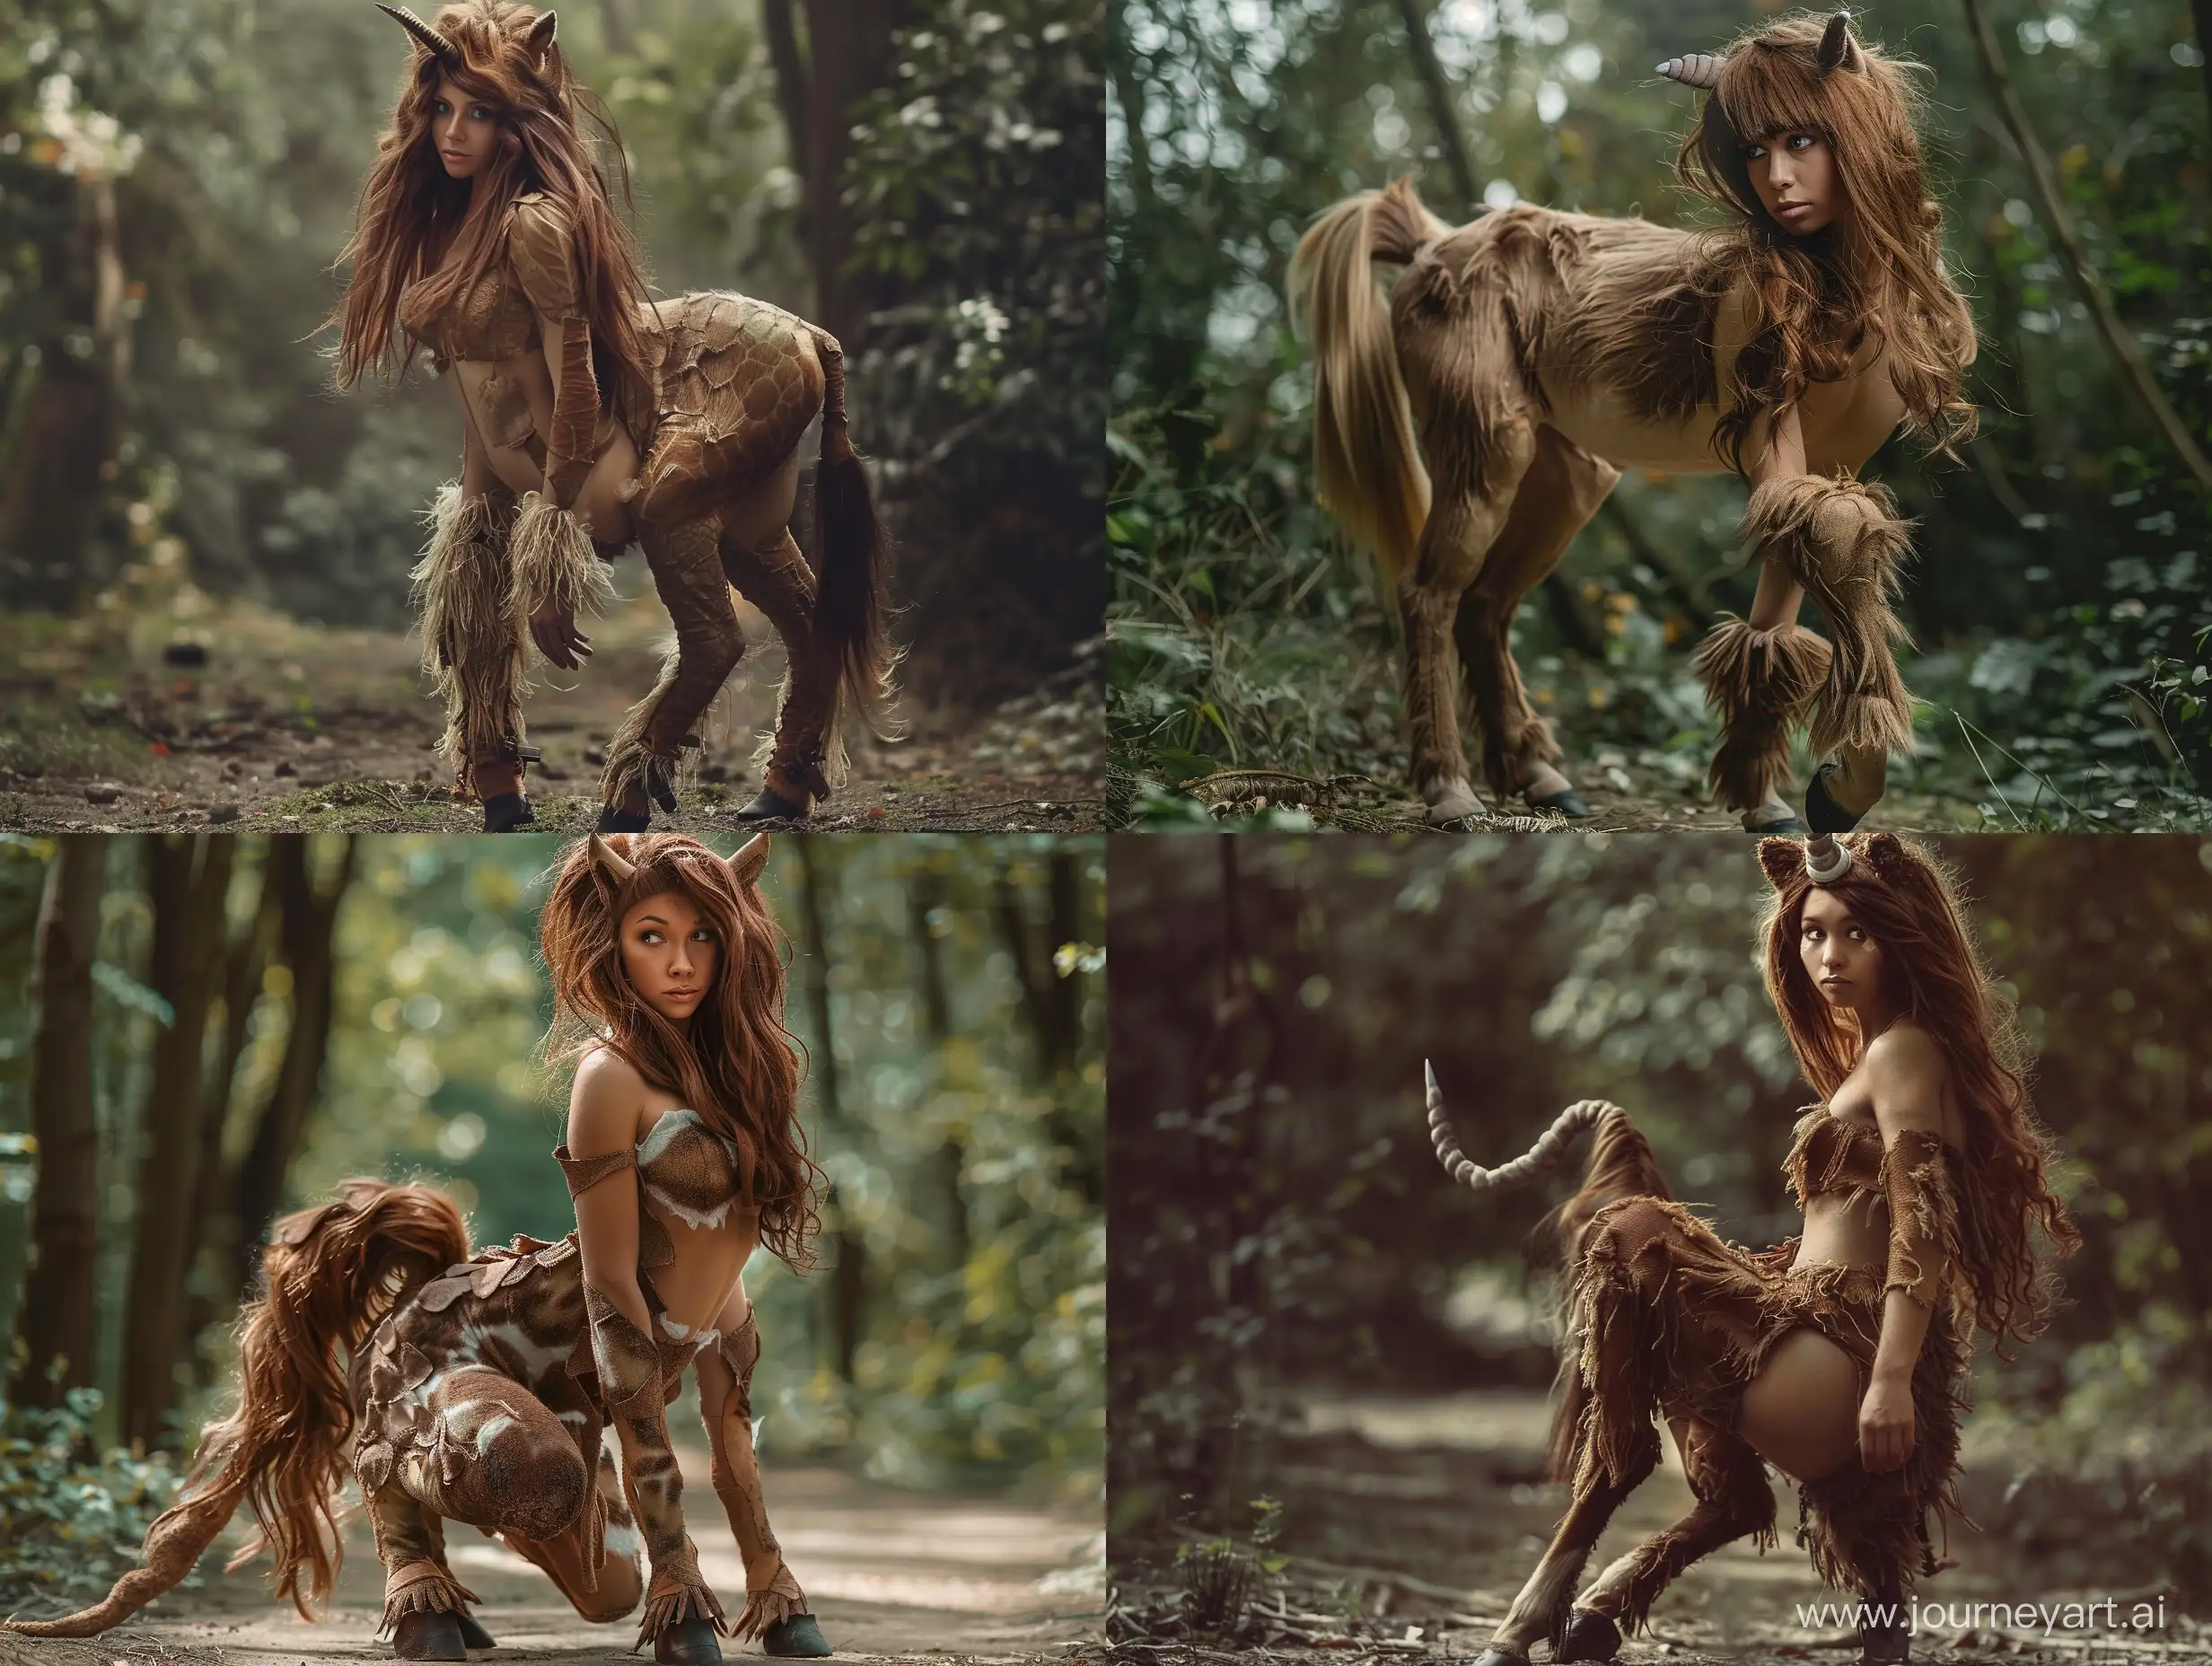 A female centaur. She has loose brown hair. She has hooves, fur, a tail. She is standing on all fours in a forest. Realistic photograph, full body picture